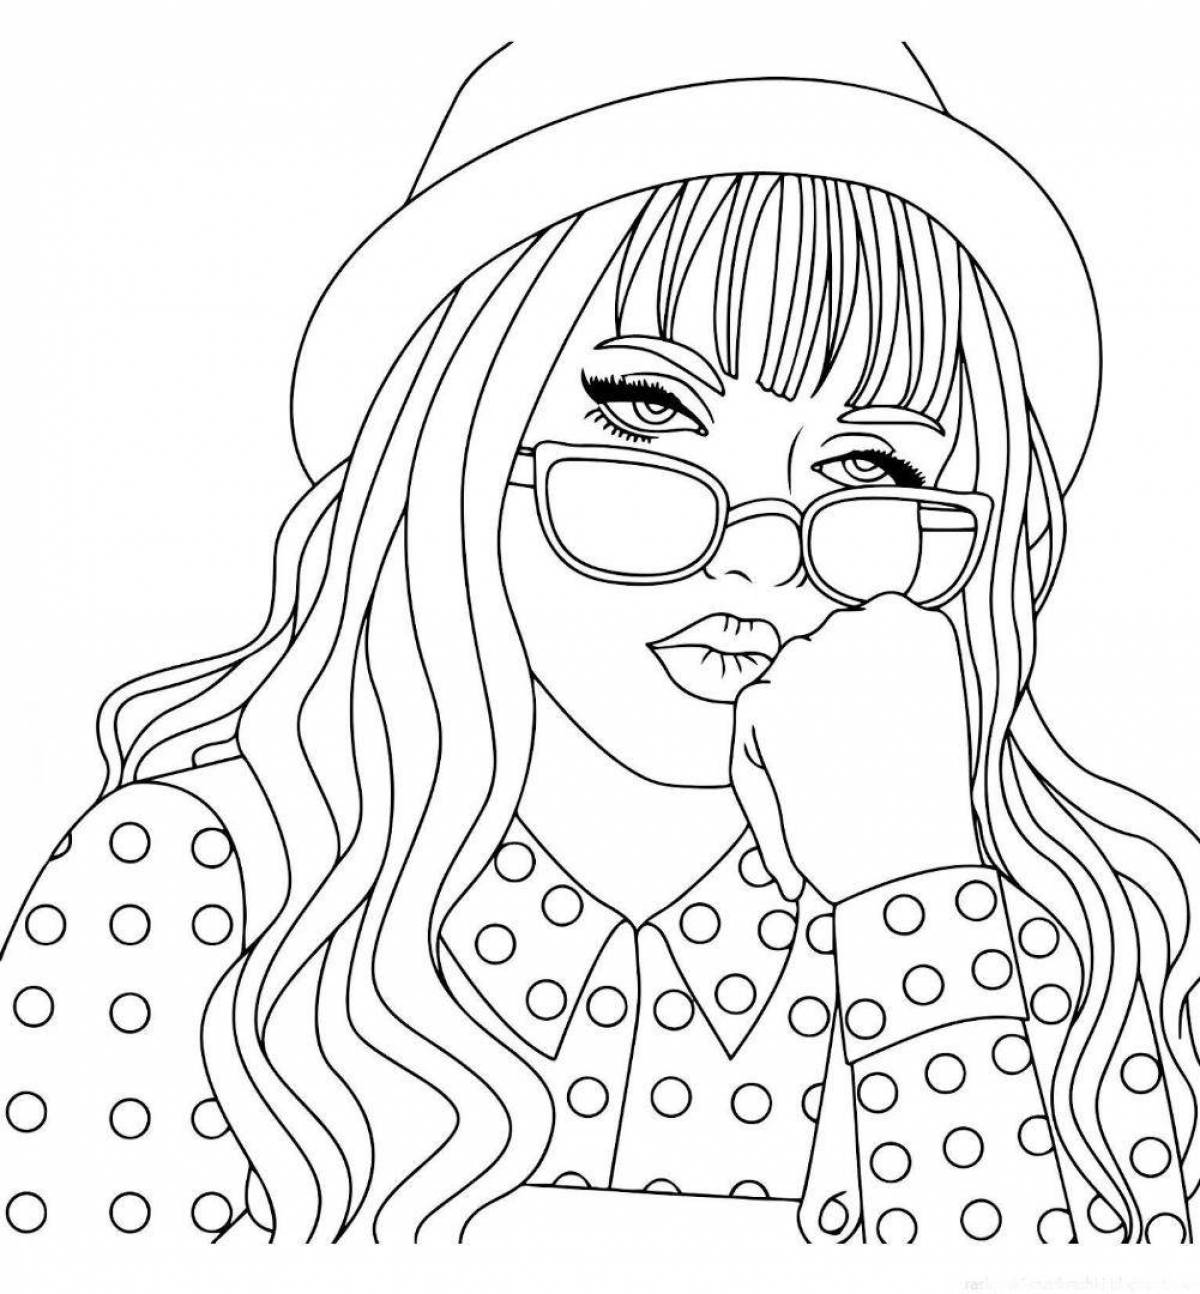 Exciting coloring asmr